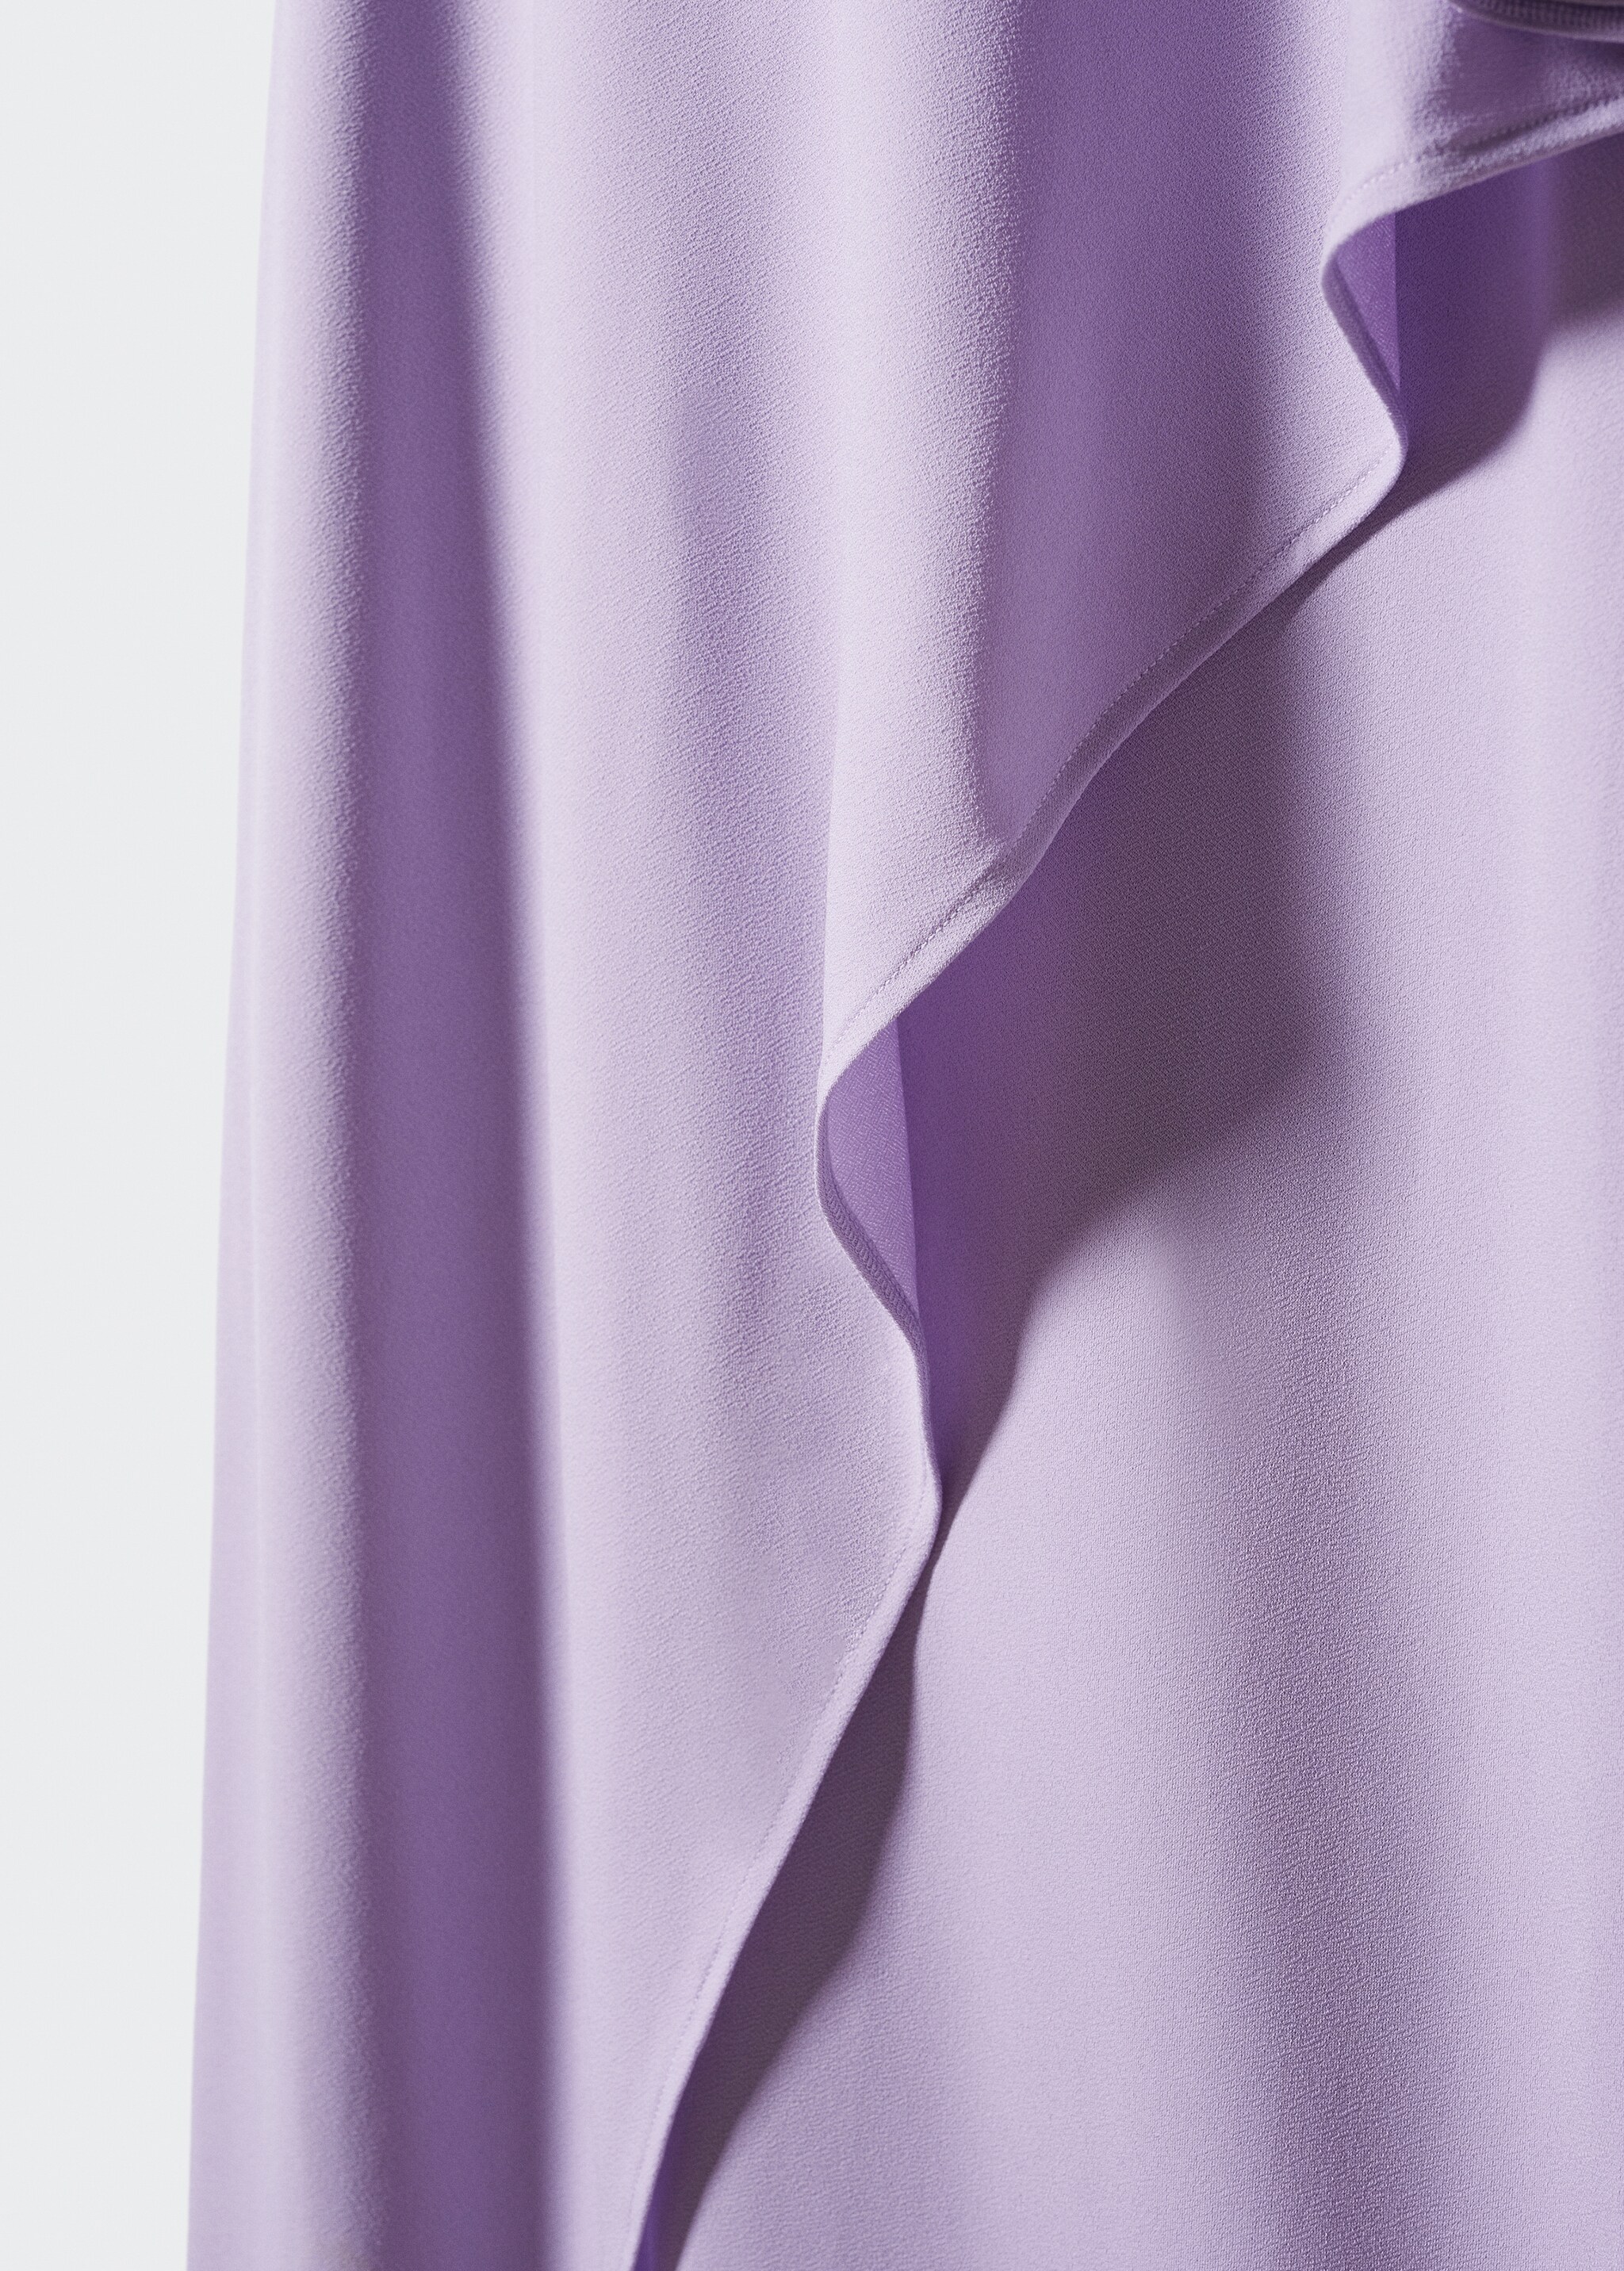 Asymmetrical sleeve dress - Details of the article 8